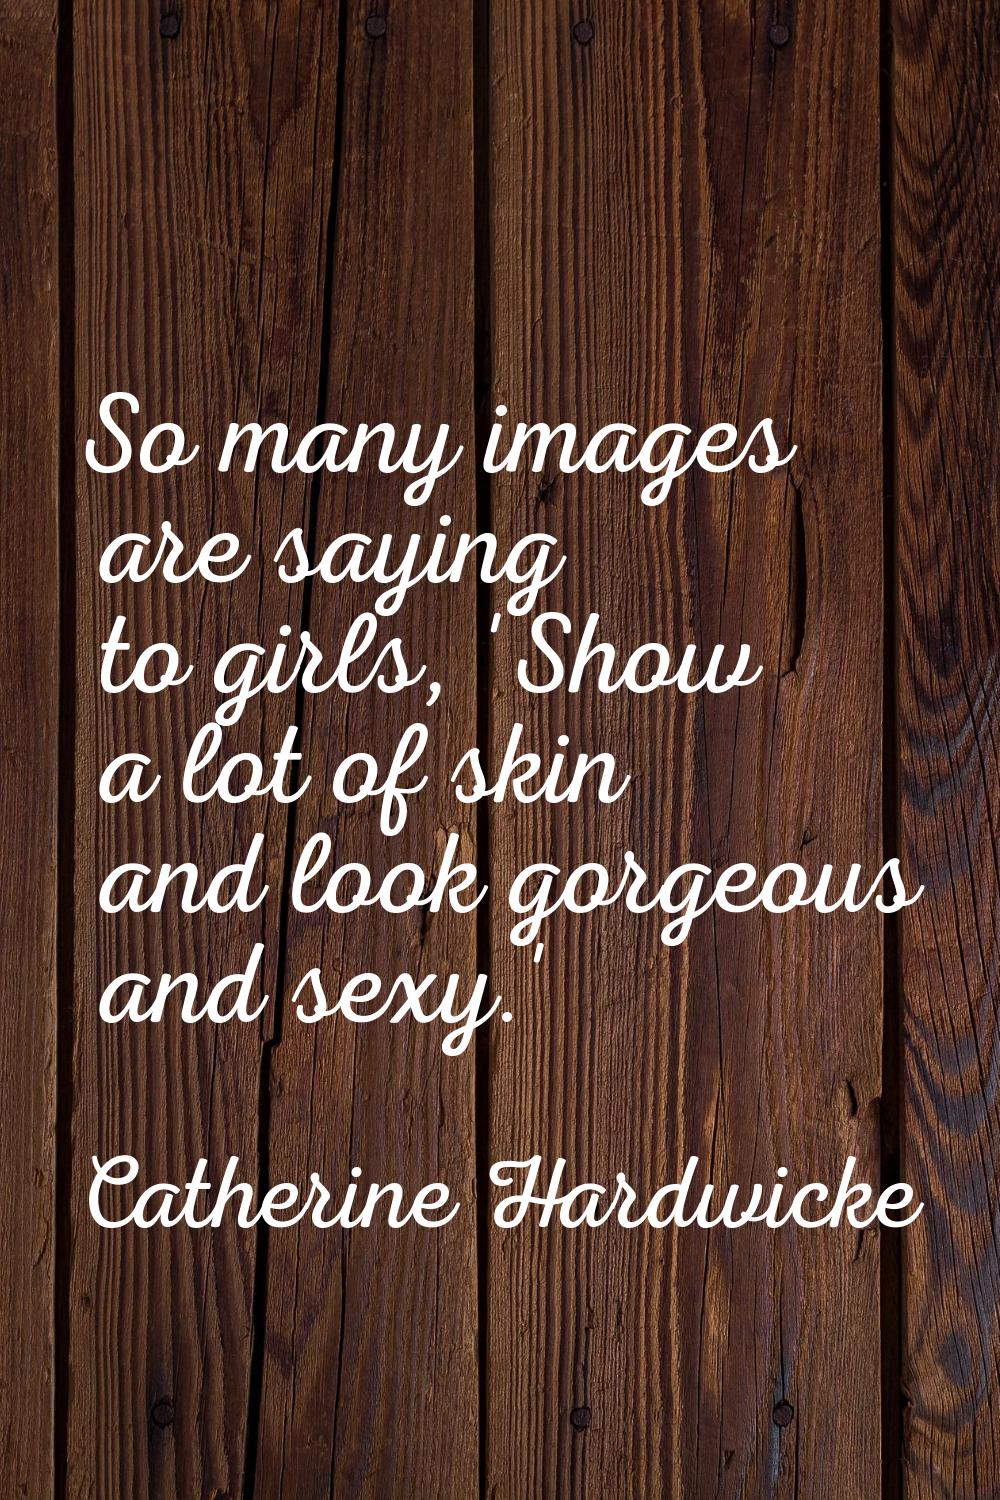 So many images are saying to girls, 'Show a lot of skin and look gorgeous and sexy.'